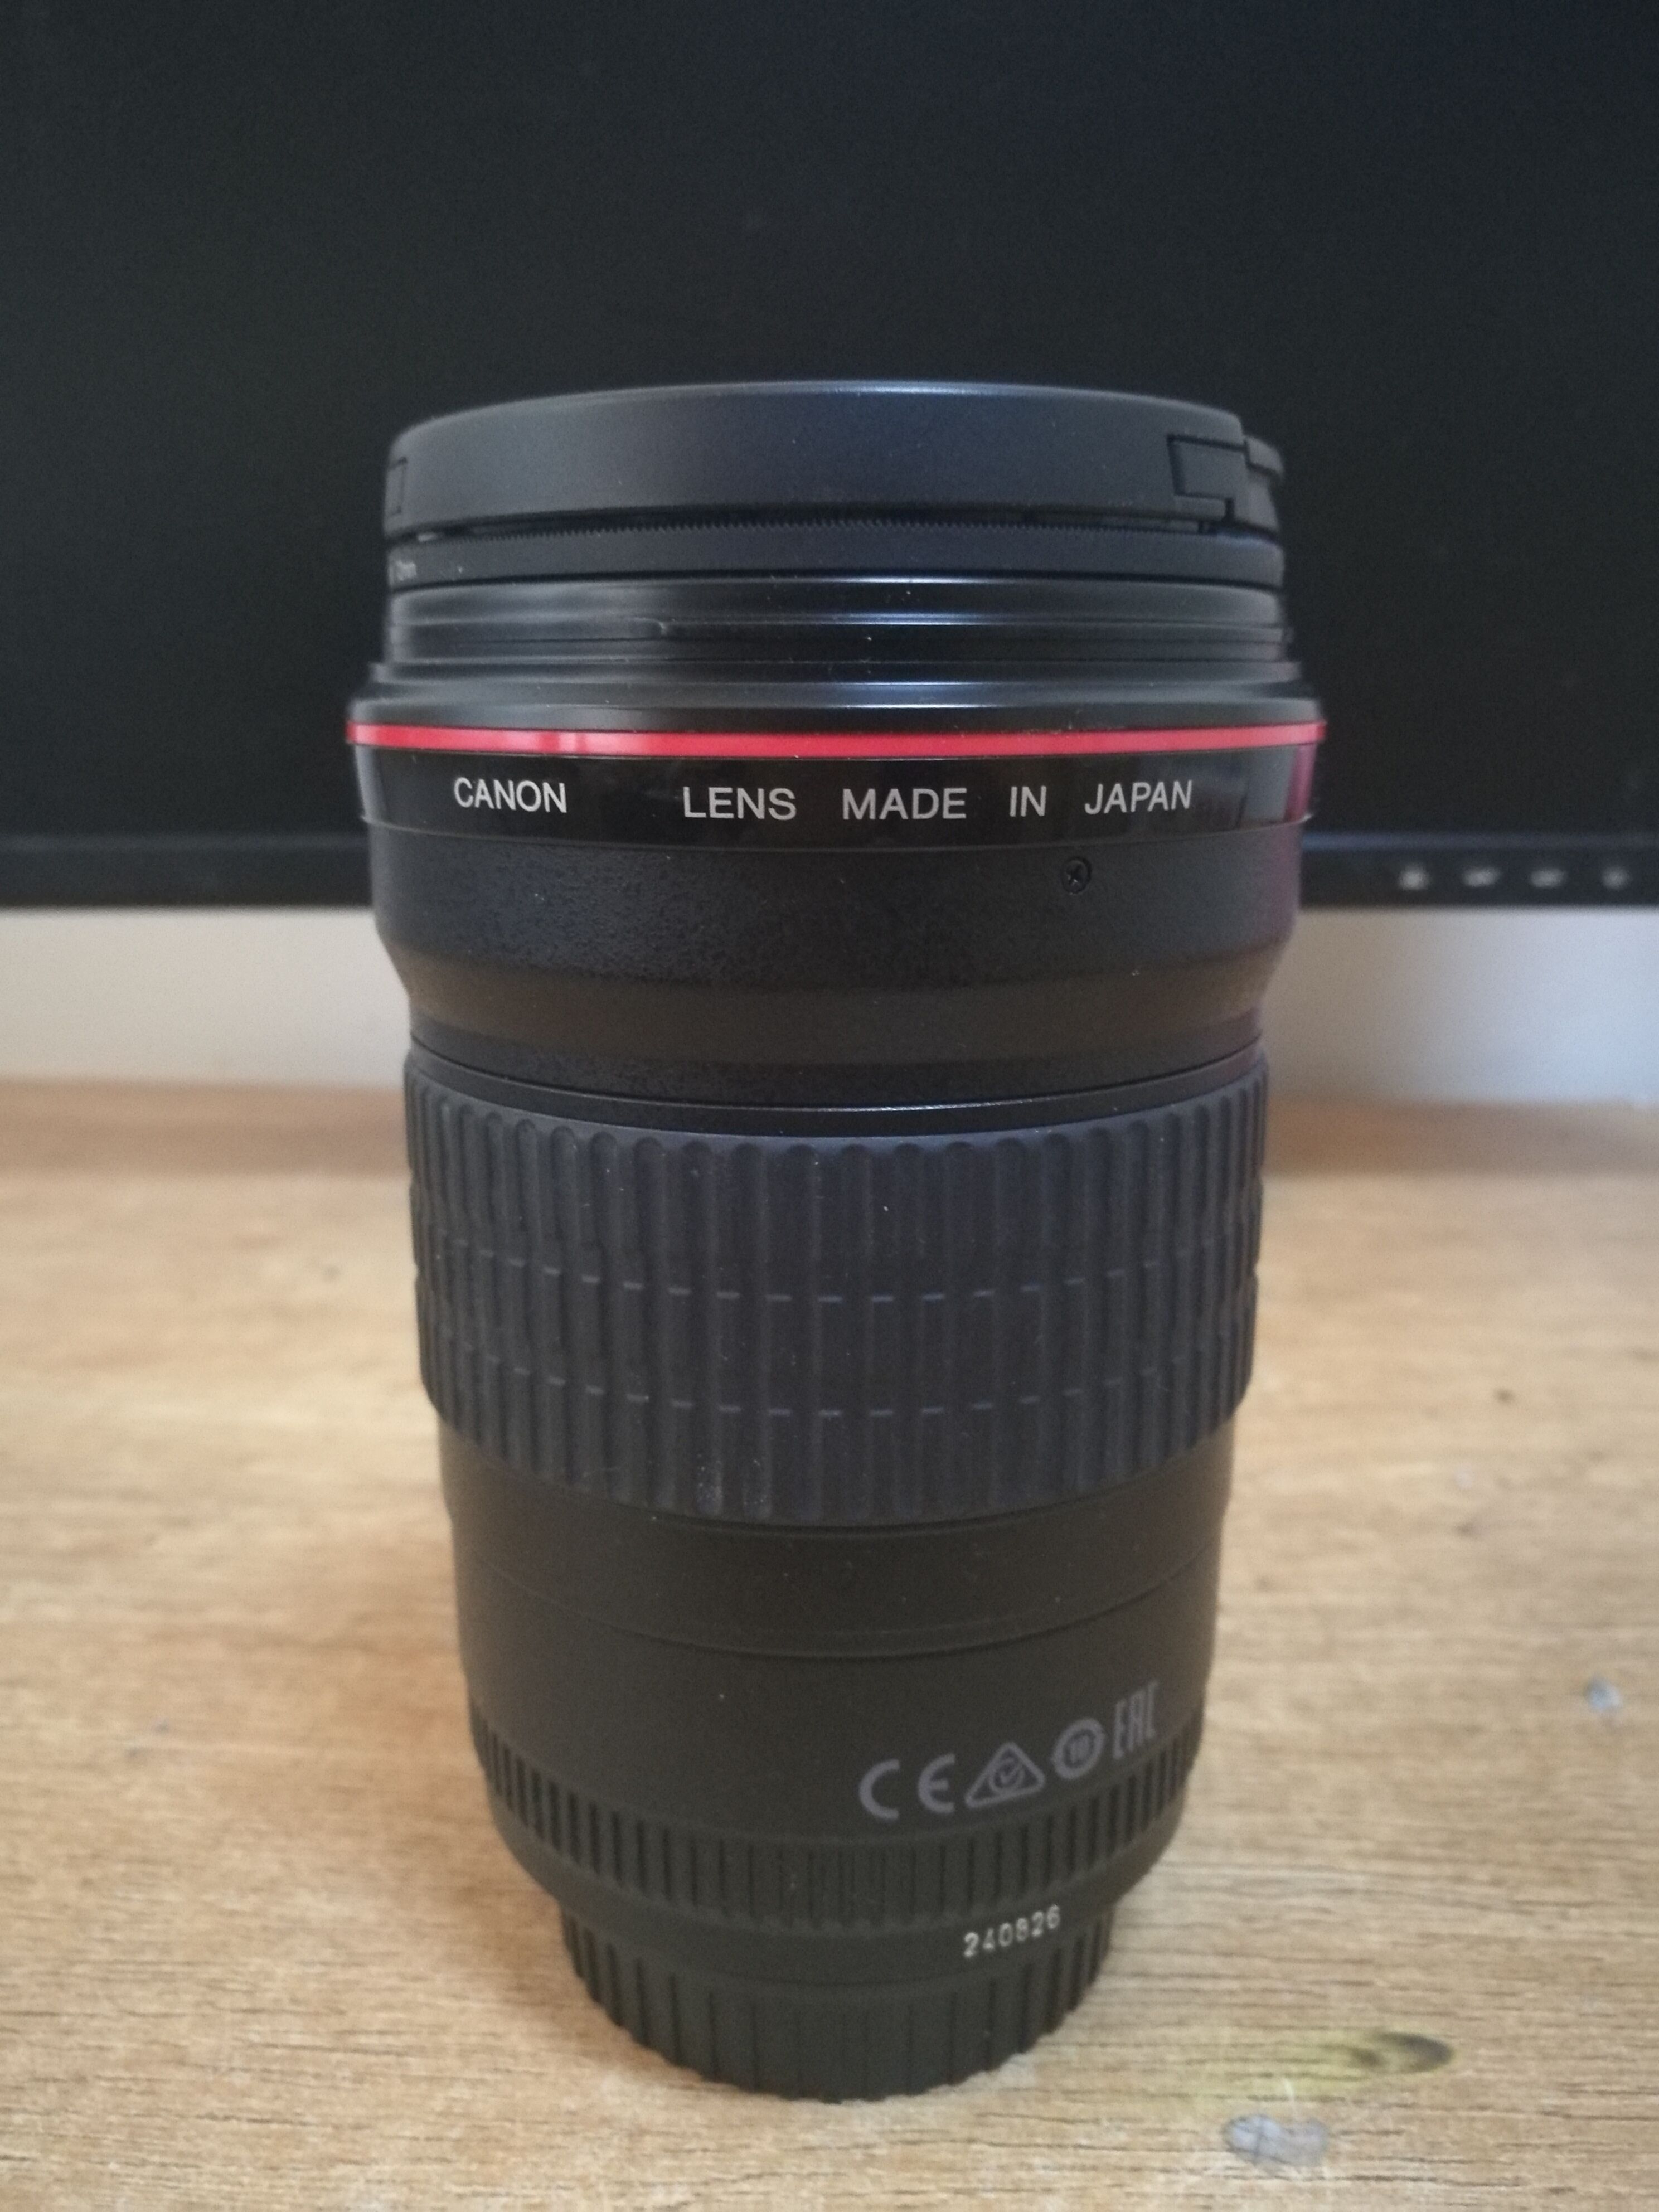  Self used Canon EF 135mm f/2L USM sold 99 new